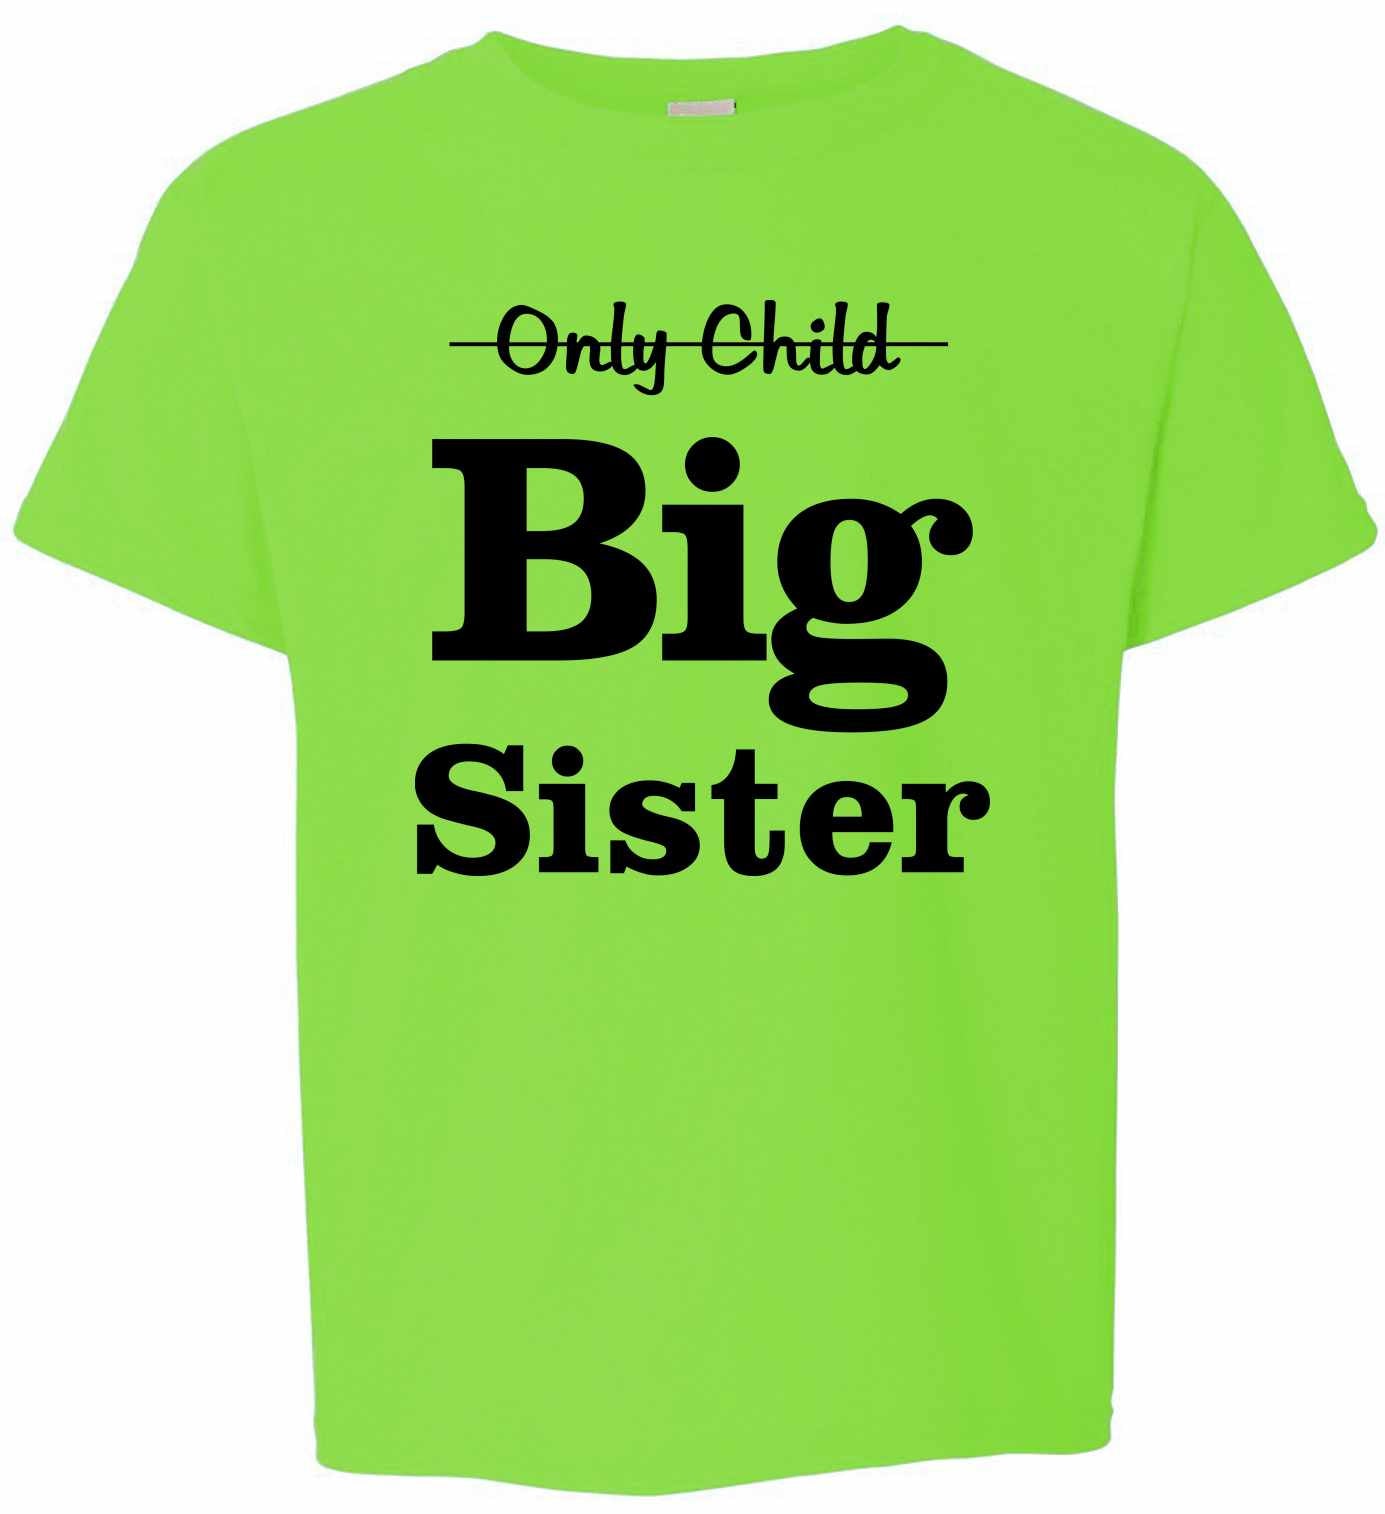 Only Child BIG SISTER on Kids T-Shirt (#967-201)